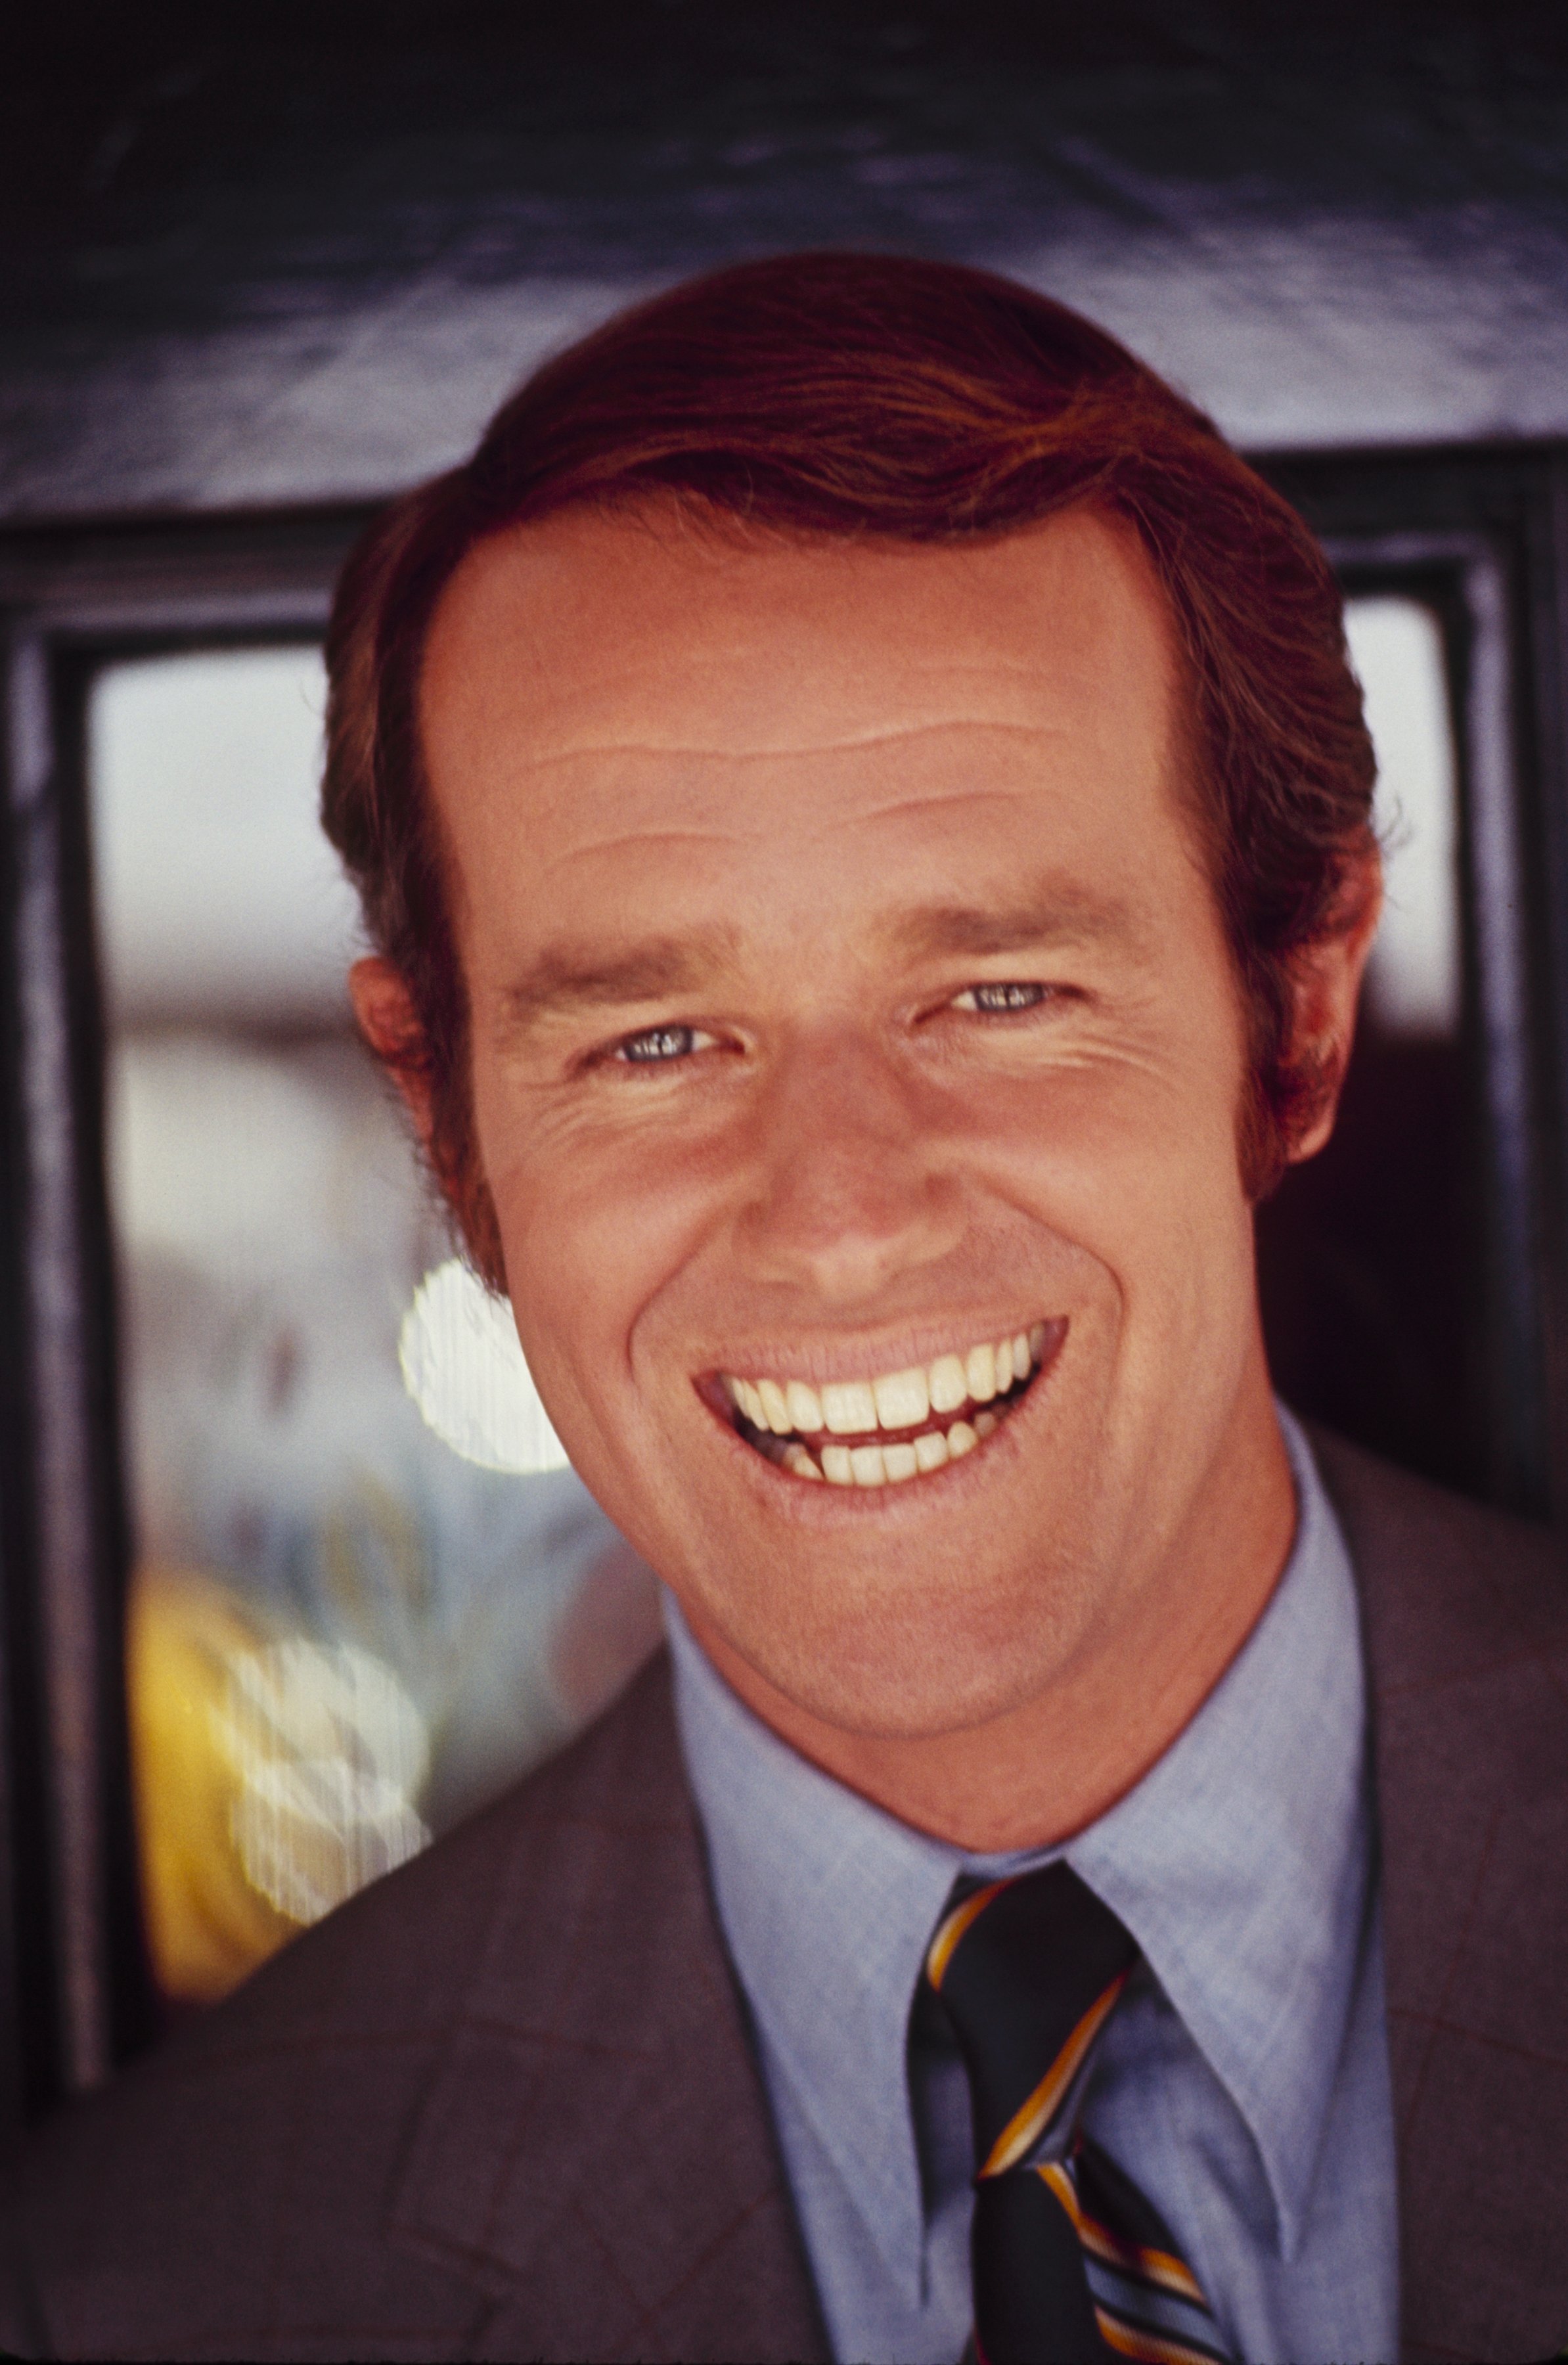 Mike Farrell on "The Man and The City" on September 15, 1971. | Source: Getty Images